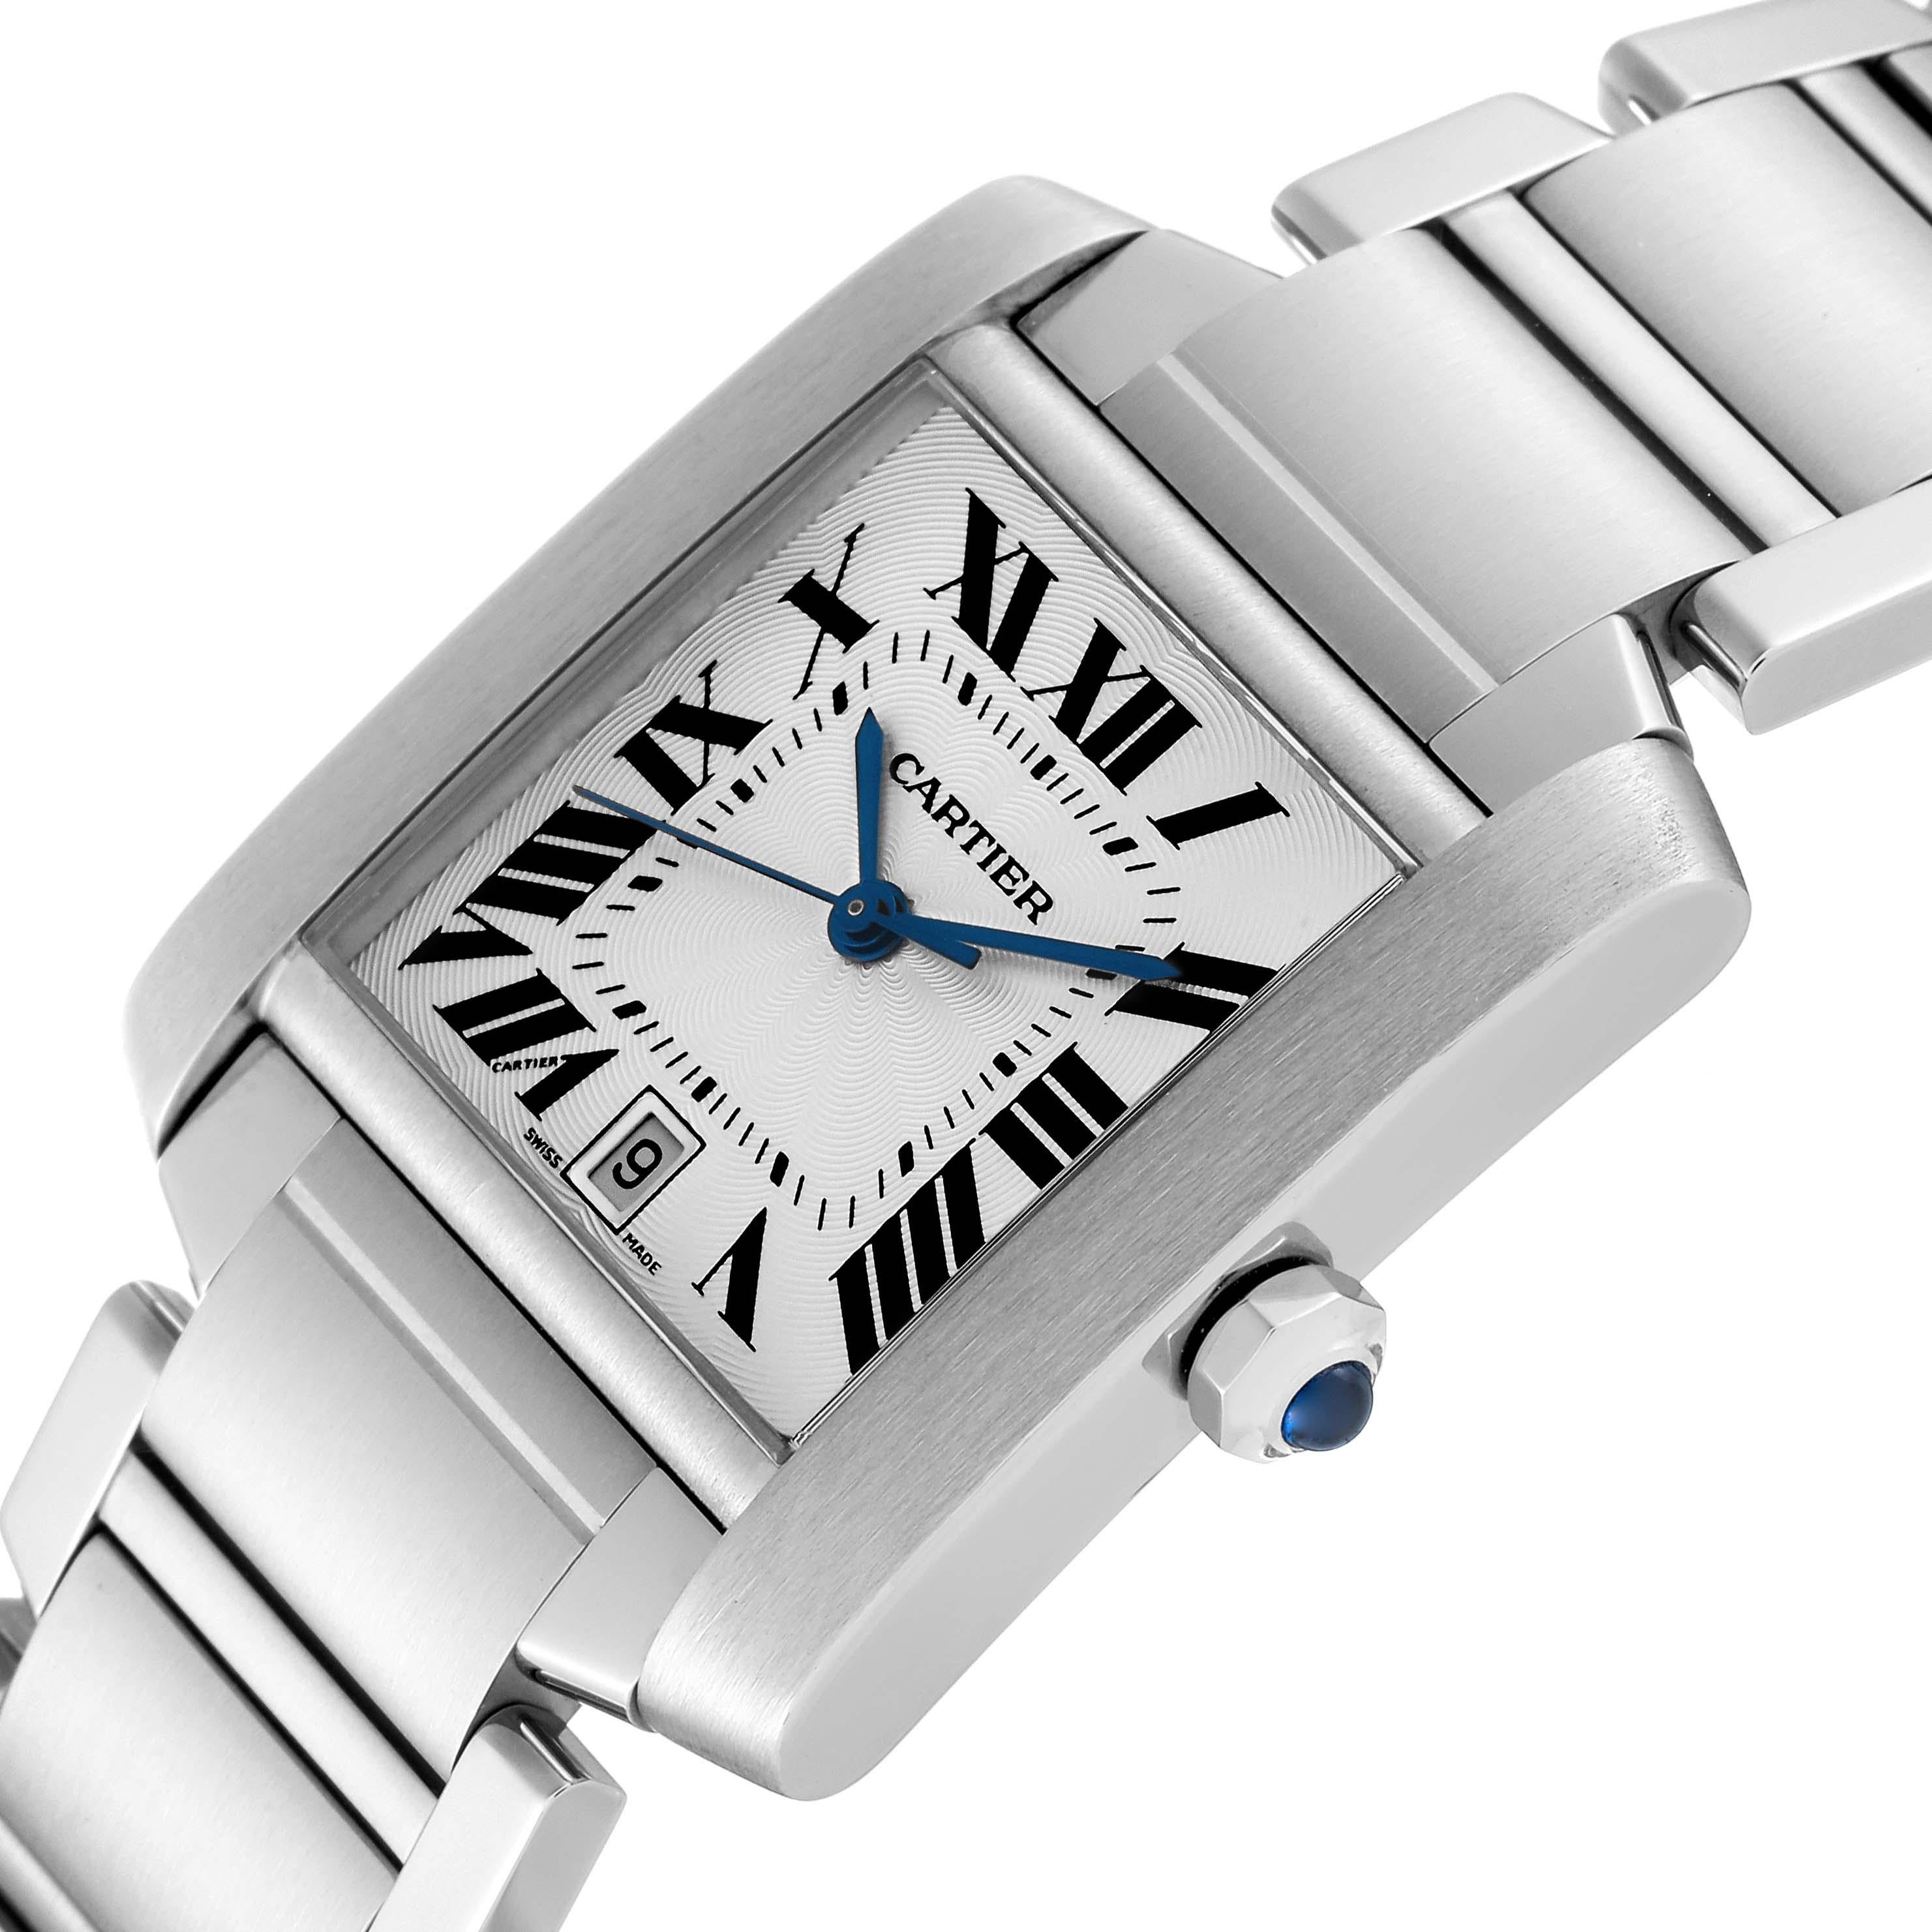 Cartier Tank Francaise Large Automatic Steel Mens Watch W51002Q3 1